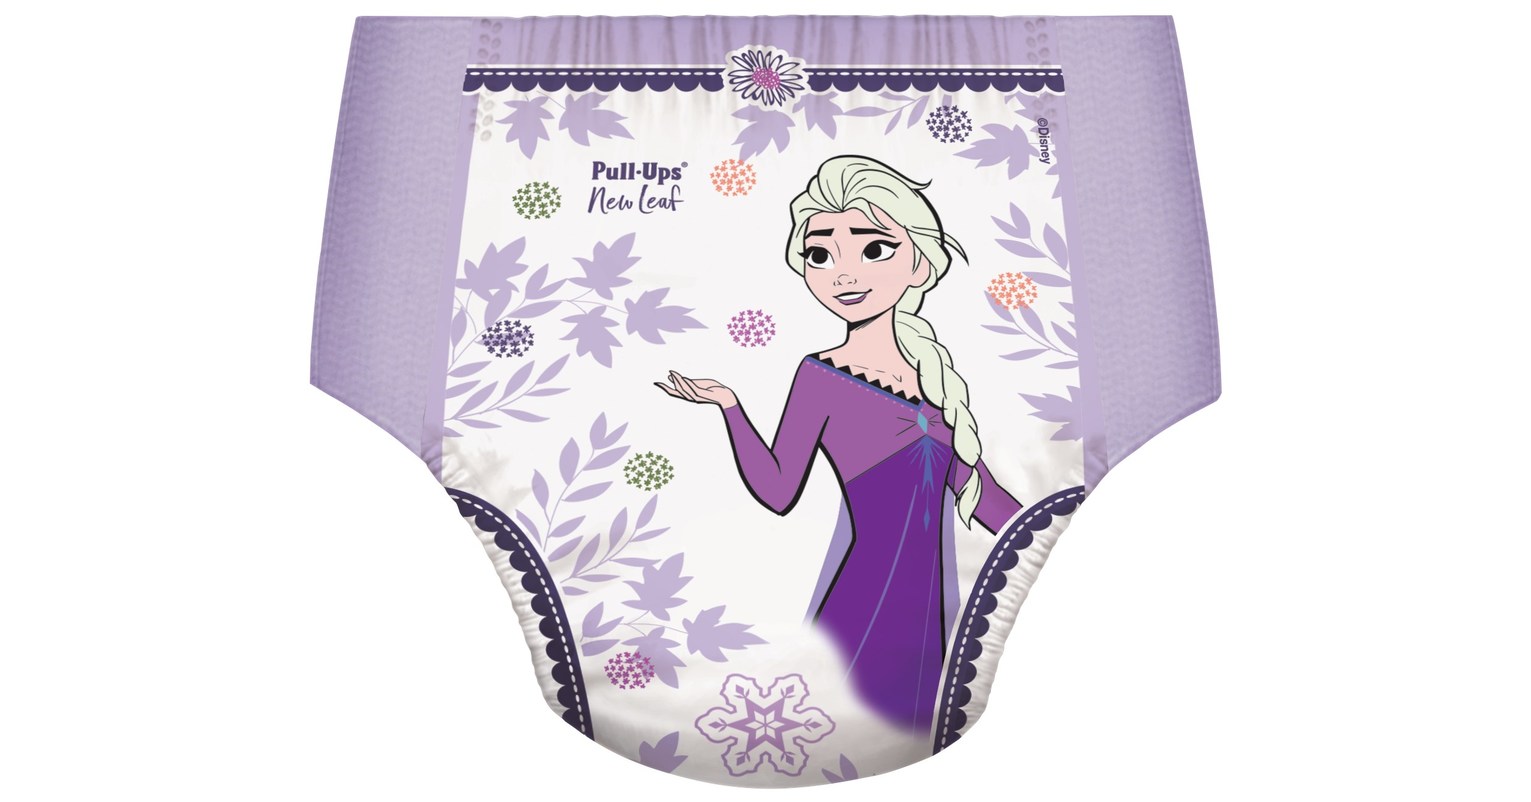 Pull-Ups® - With the snowiest season already here, there's never been a  more fitting time to pick up some Pull-Ups® New Leaf training underwear,  featuring fun Frozen 2 desgins! Learn more about